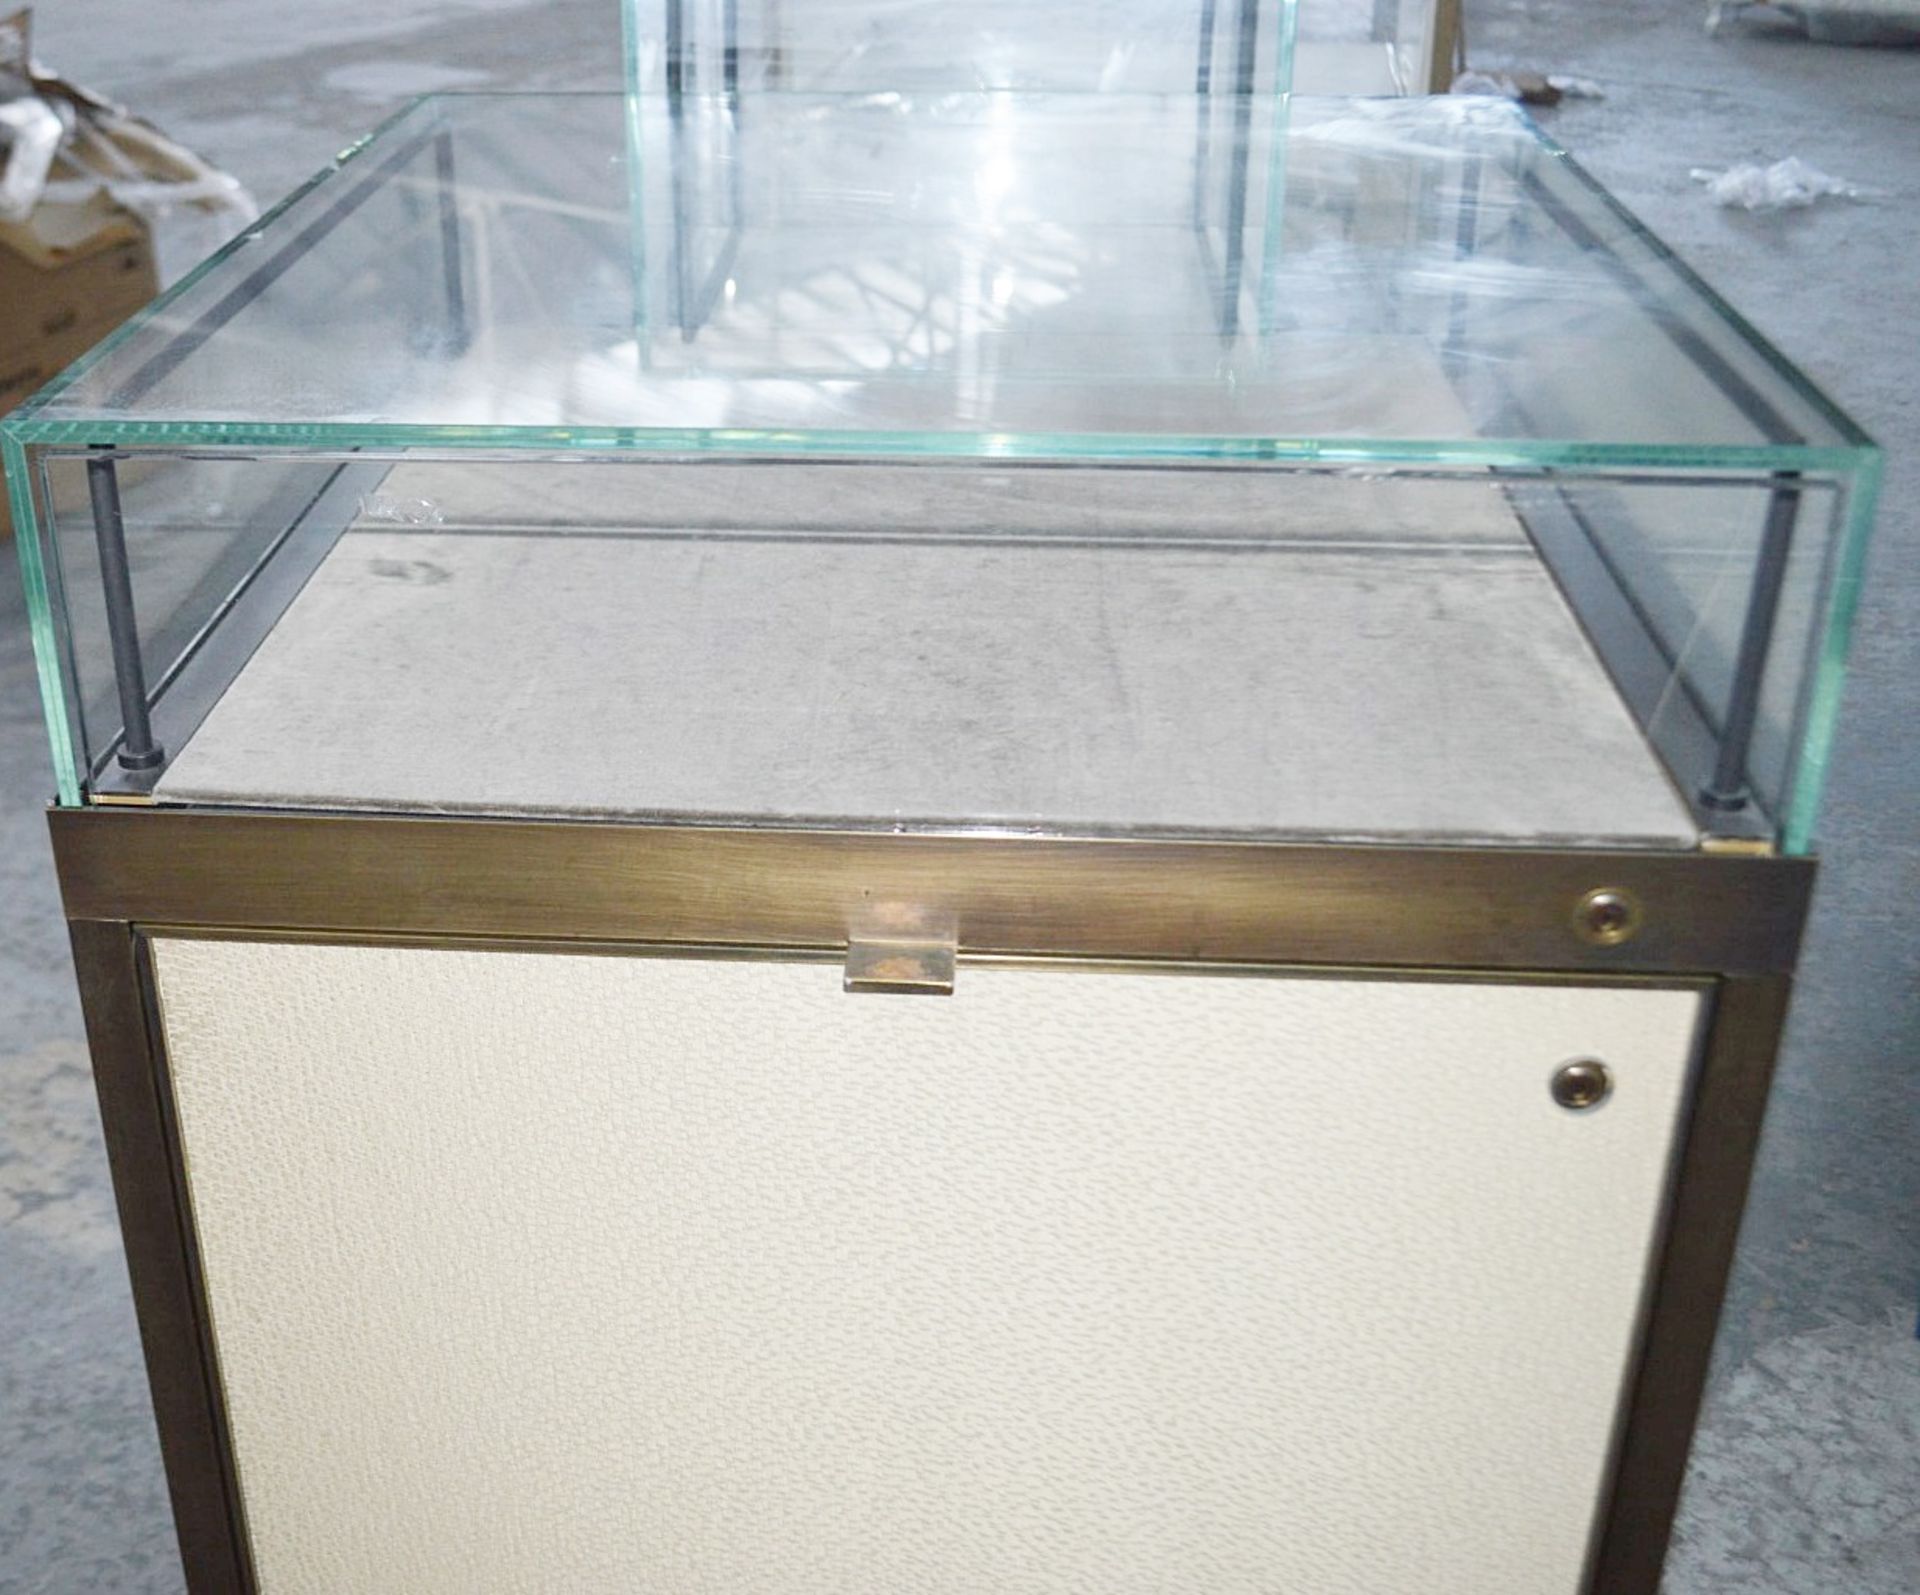 1 x Luxury Double Cabinet Glass Display Case - Dimensions: H124 x W100 x D65cm - Ex-Showroom Piece - Image 9 of 9